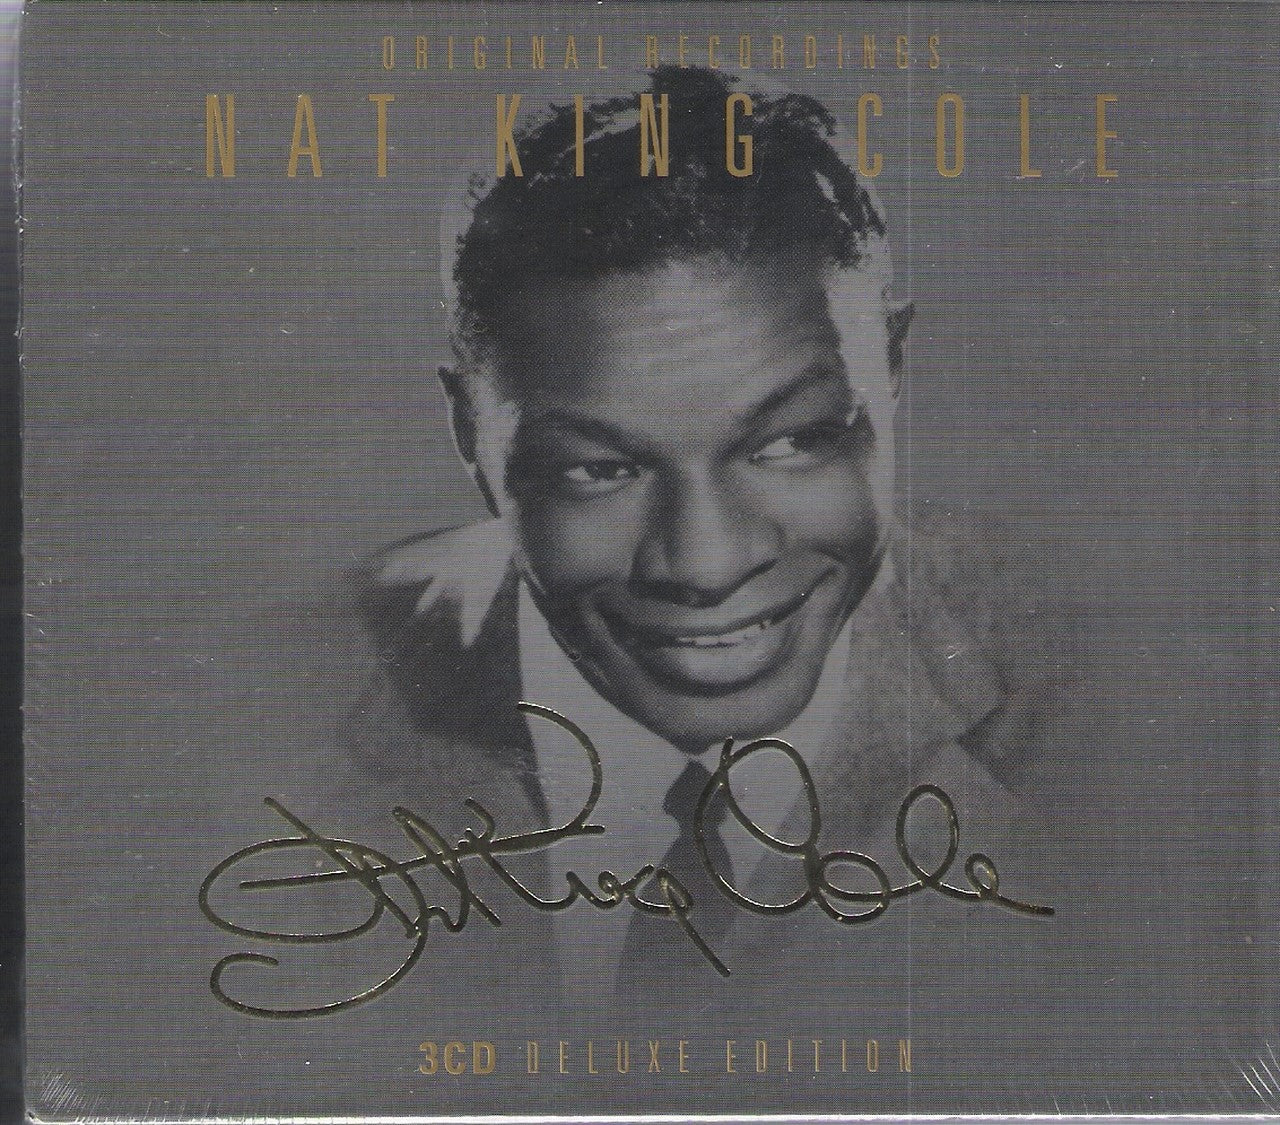 CD-3 - Nat King Cole - Deluxe Edition